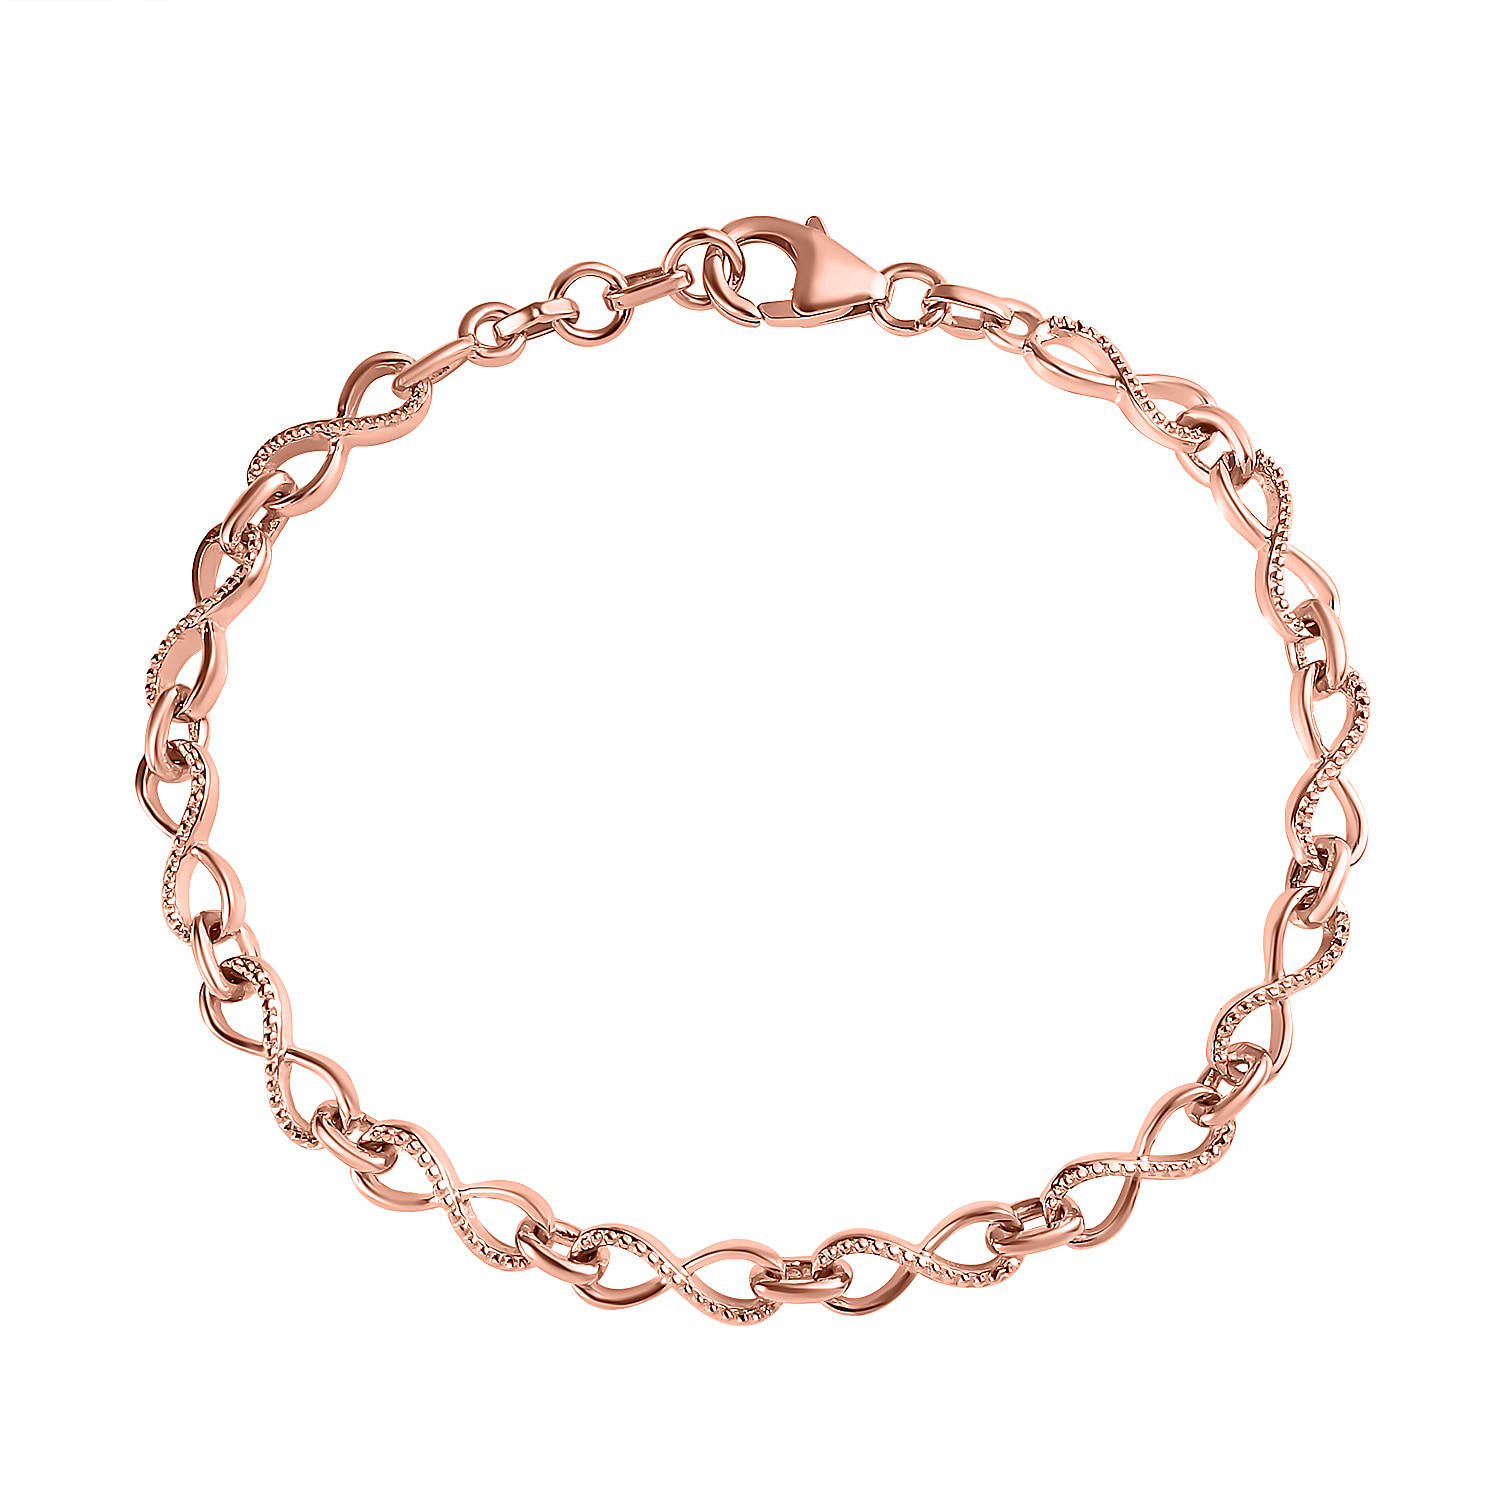 Infinity Link Bracelet Size 7.5 with Extender in Rose Gold Plated Sterling Silver, Silver Wt. 6.82 Gms